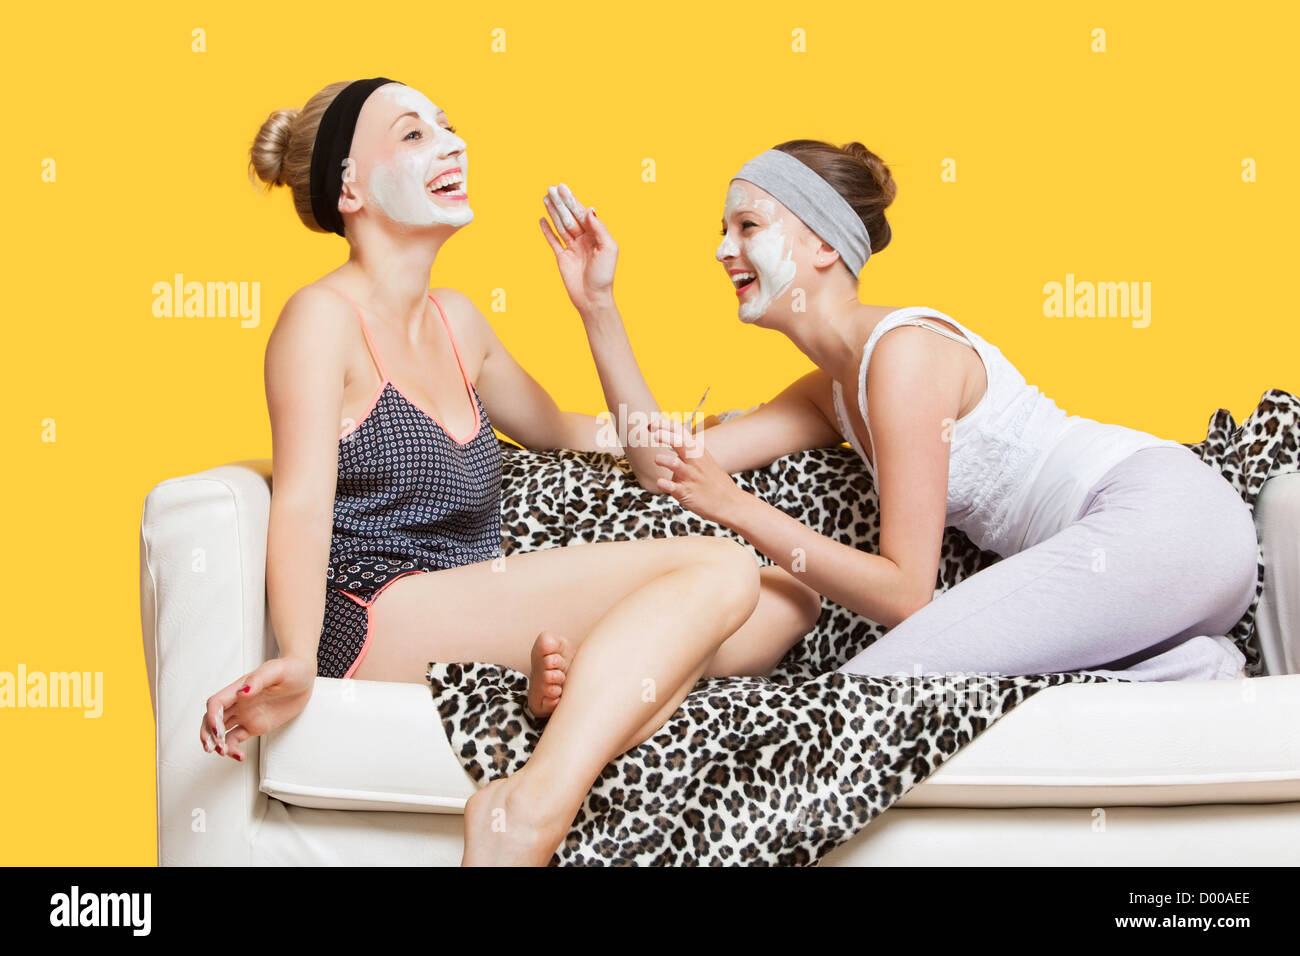 Two happy young women applying face pack while sitting on sofa over yellow background Stock Photo